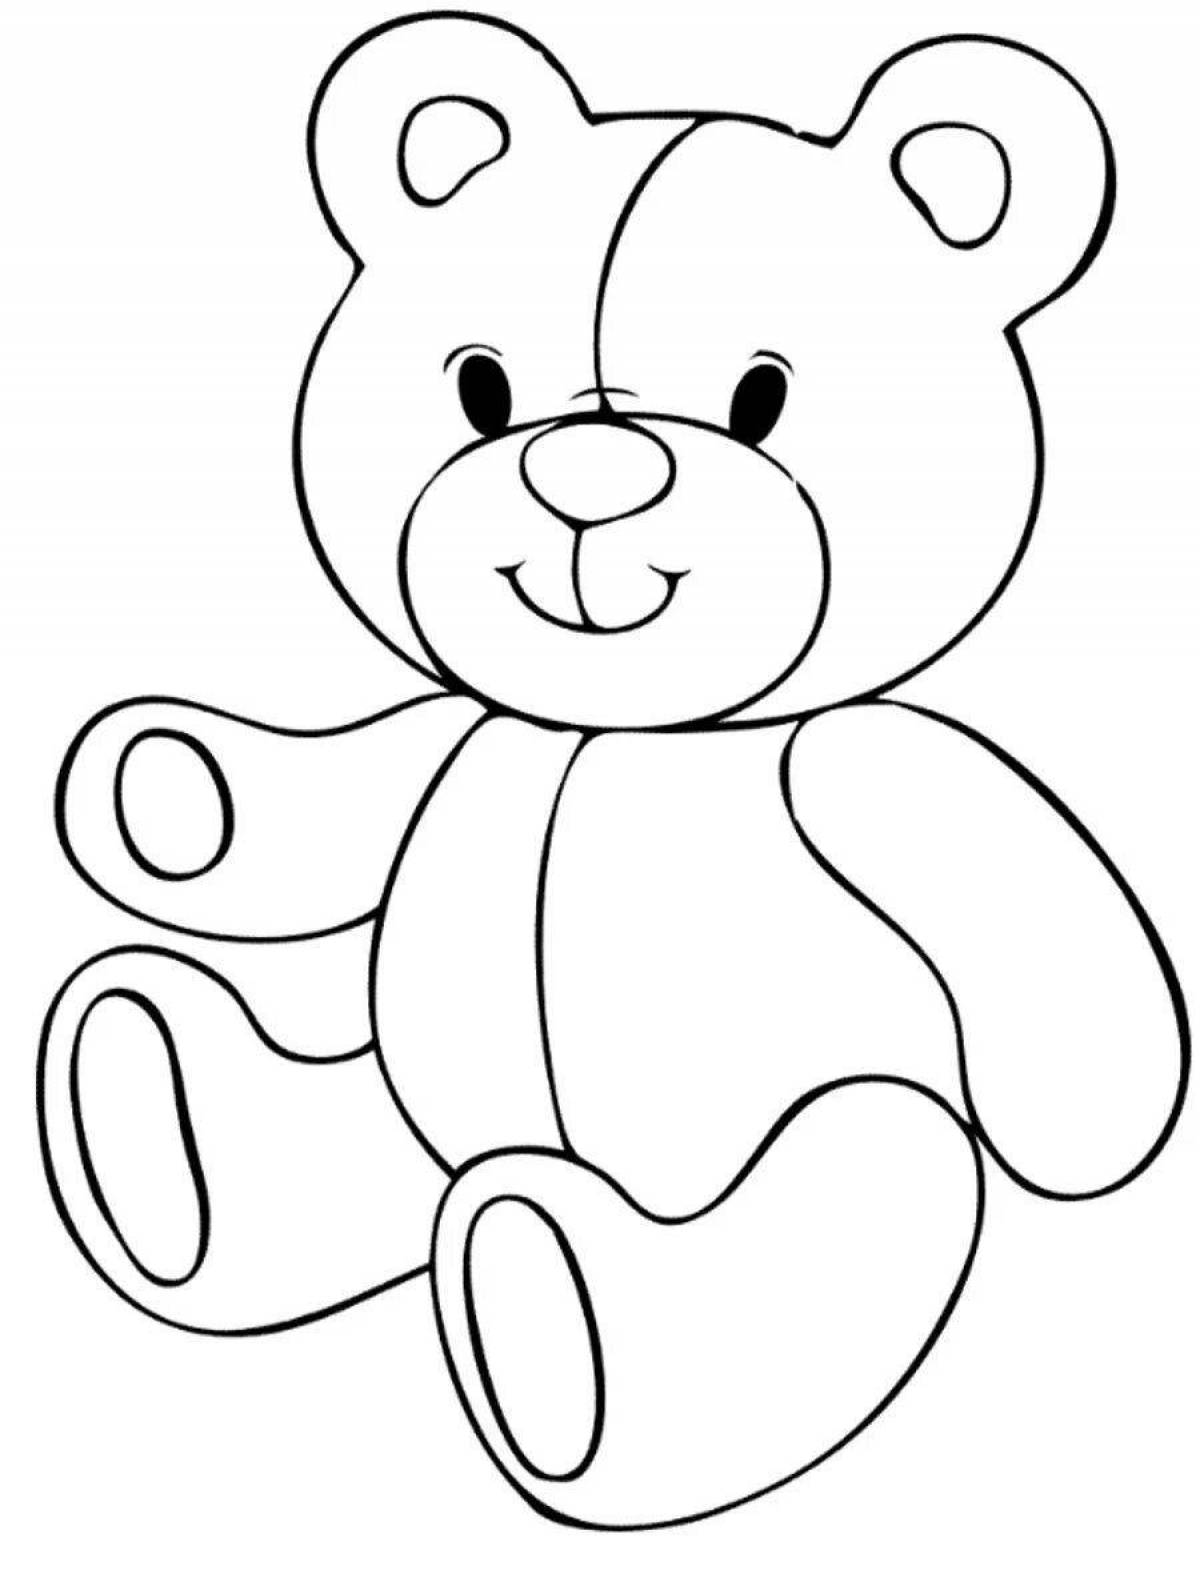 Colorful teddy bear color the picture